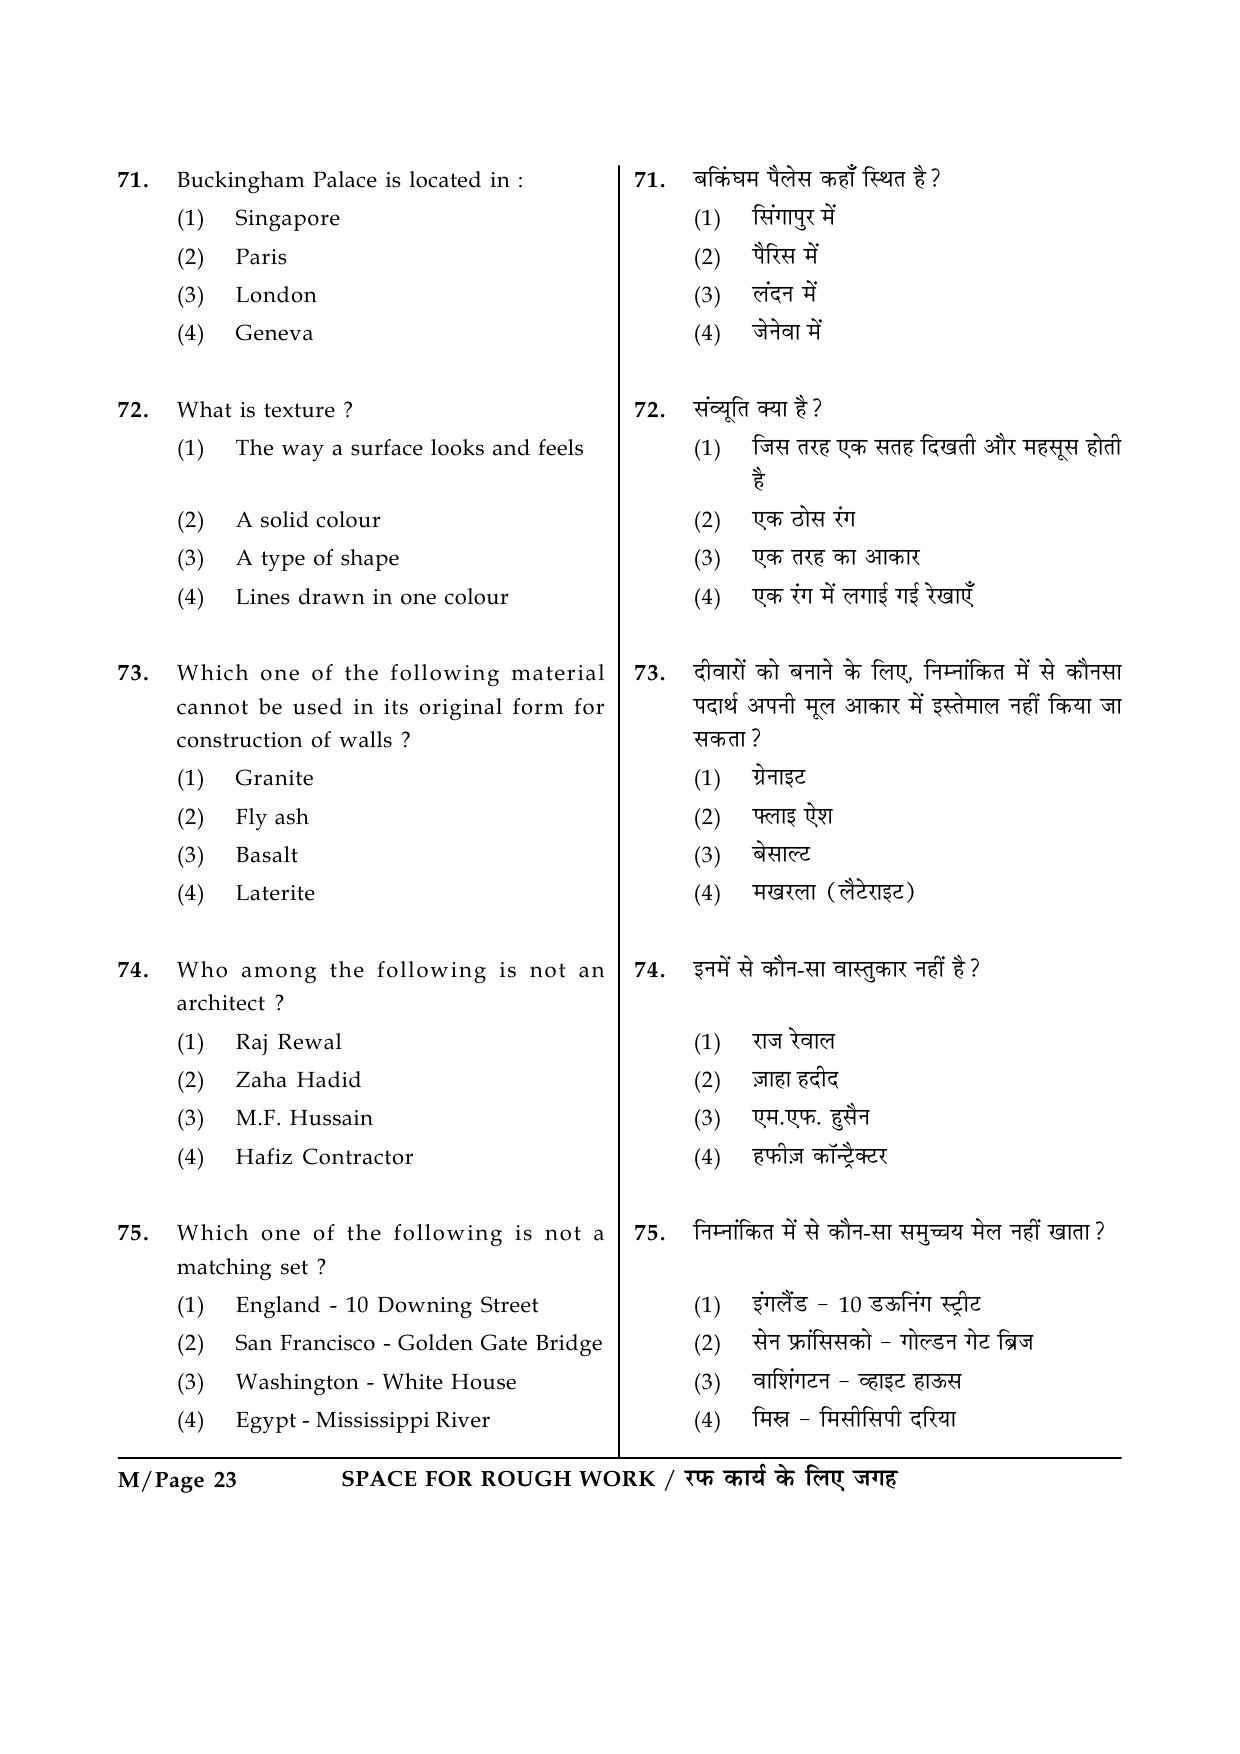 JEE Main Exam Question Paper 2015 Booklet M 23